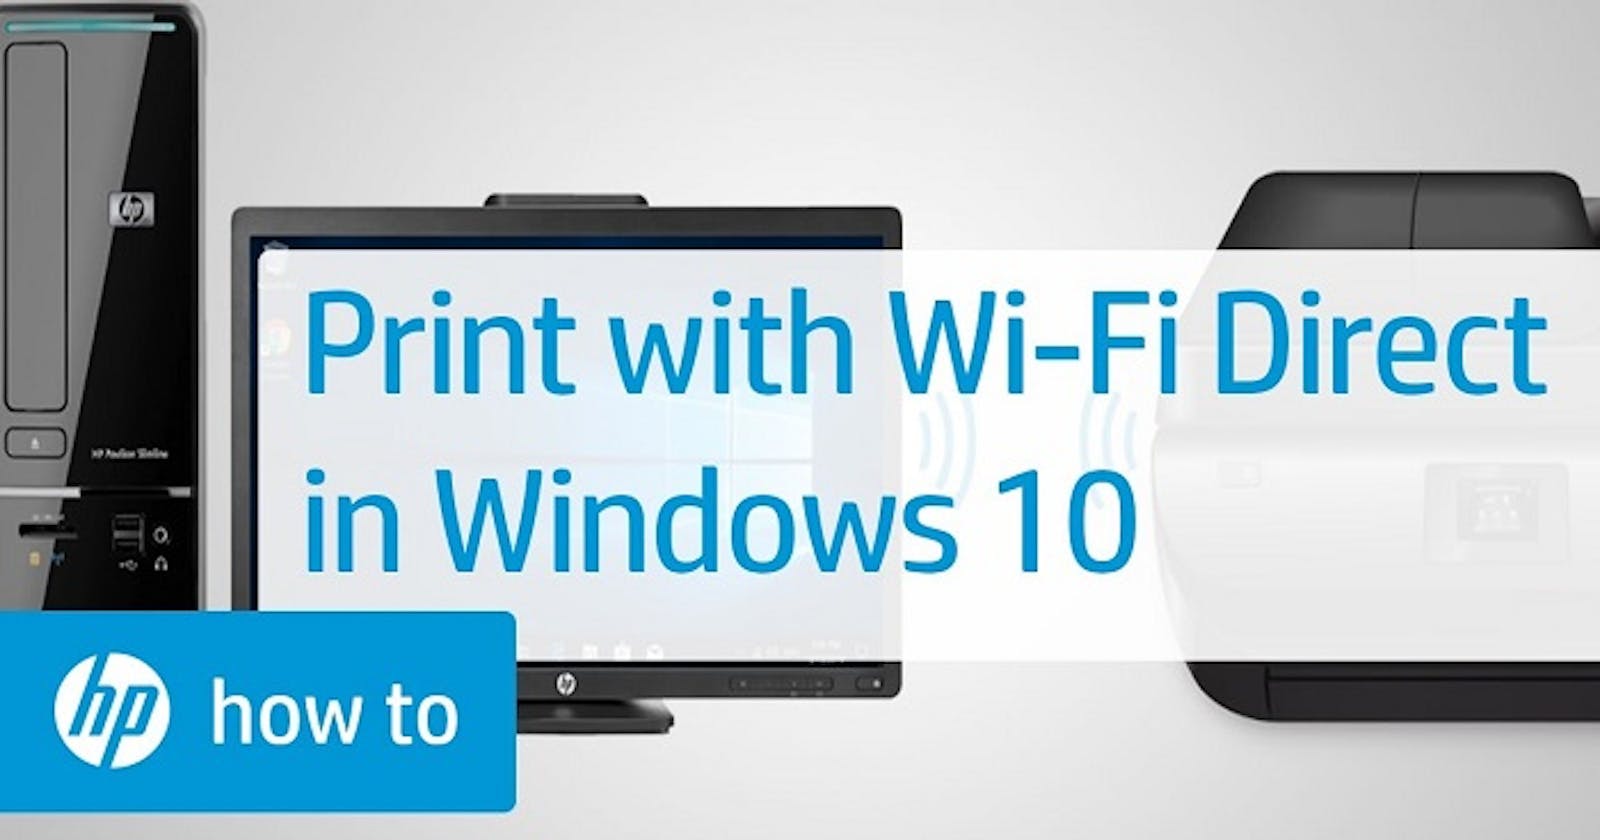 How to Print with Wi-Fi Direct on Windows or Mac?